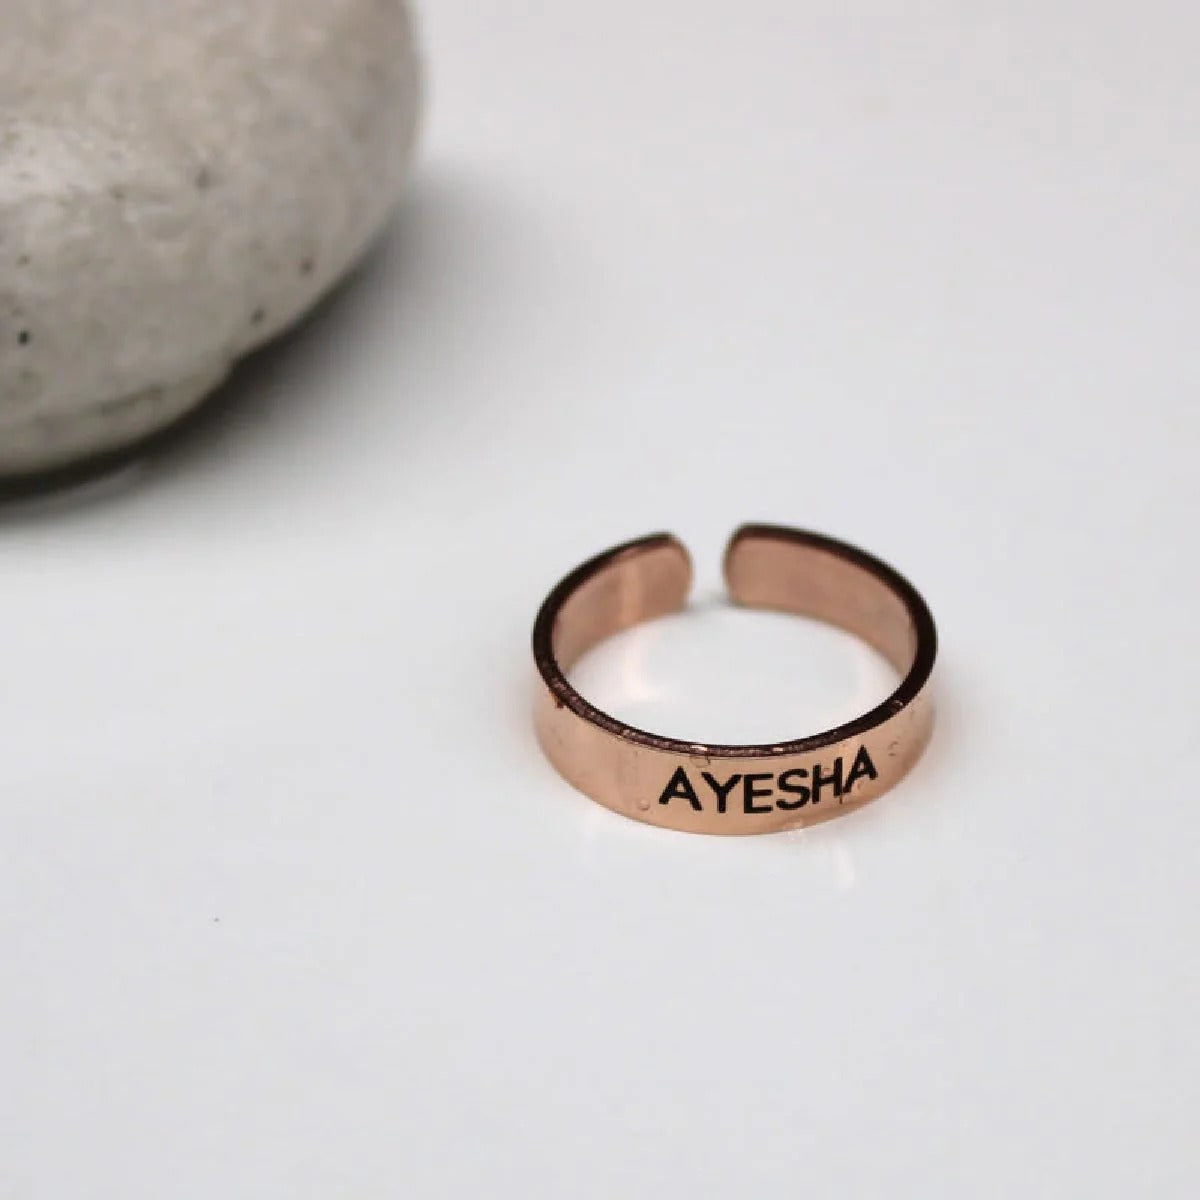 Beaded Ring with Name on it - Custom Name Rings by Talisa